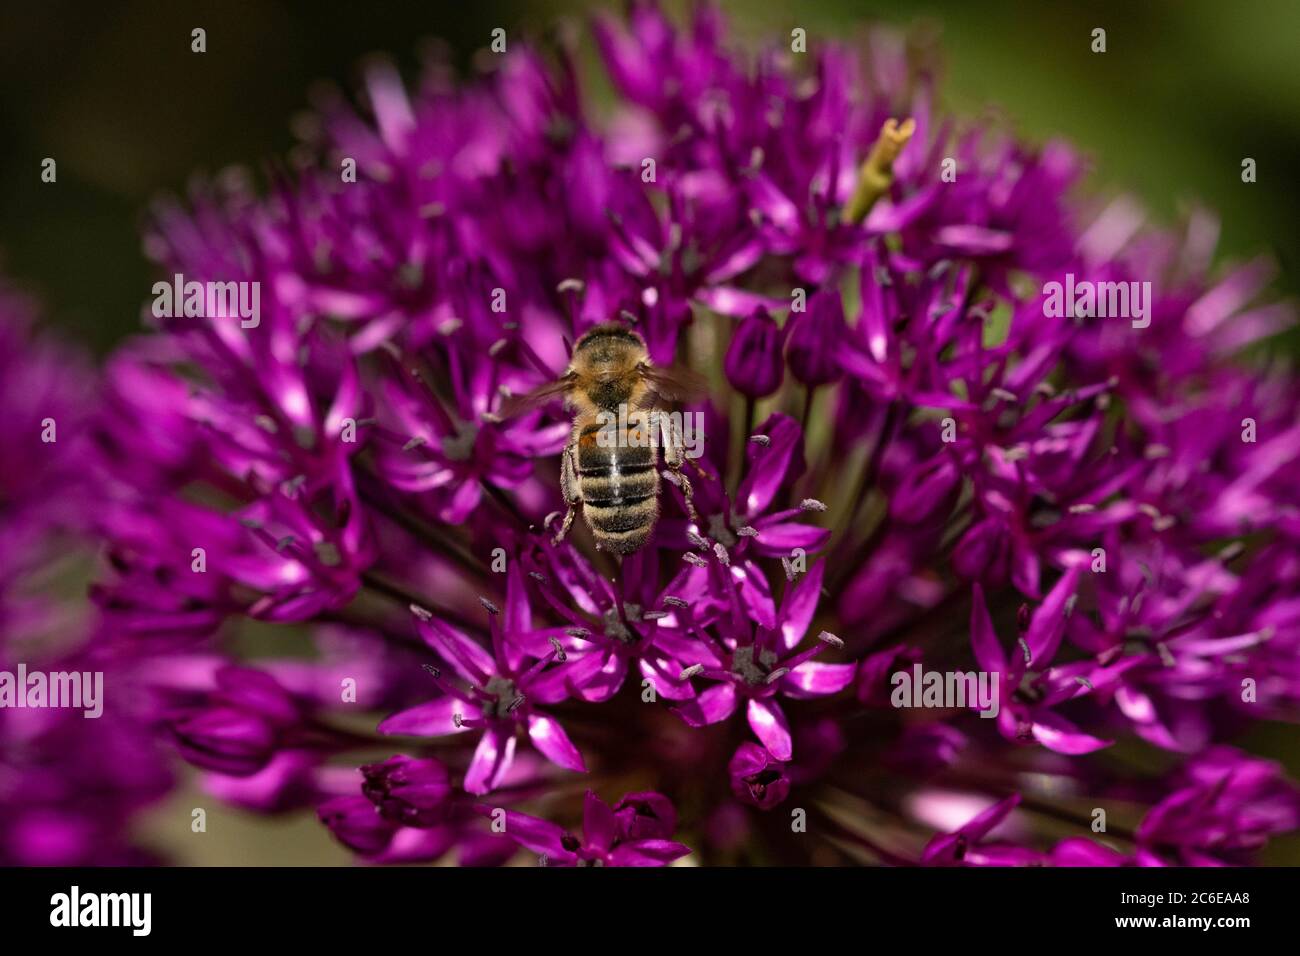 A honey bee feeding off the nectar and pollen in an allium flower. Stock Photo